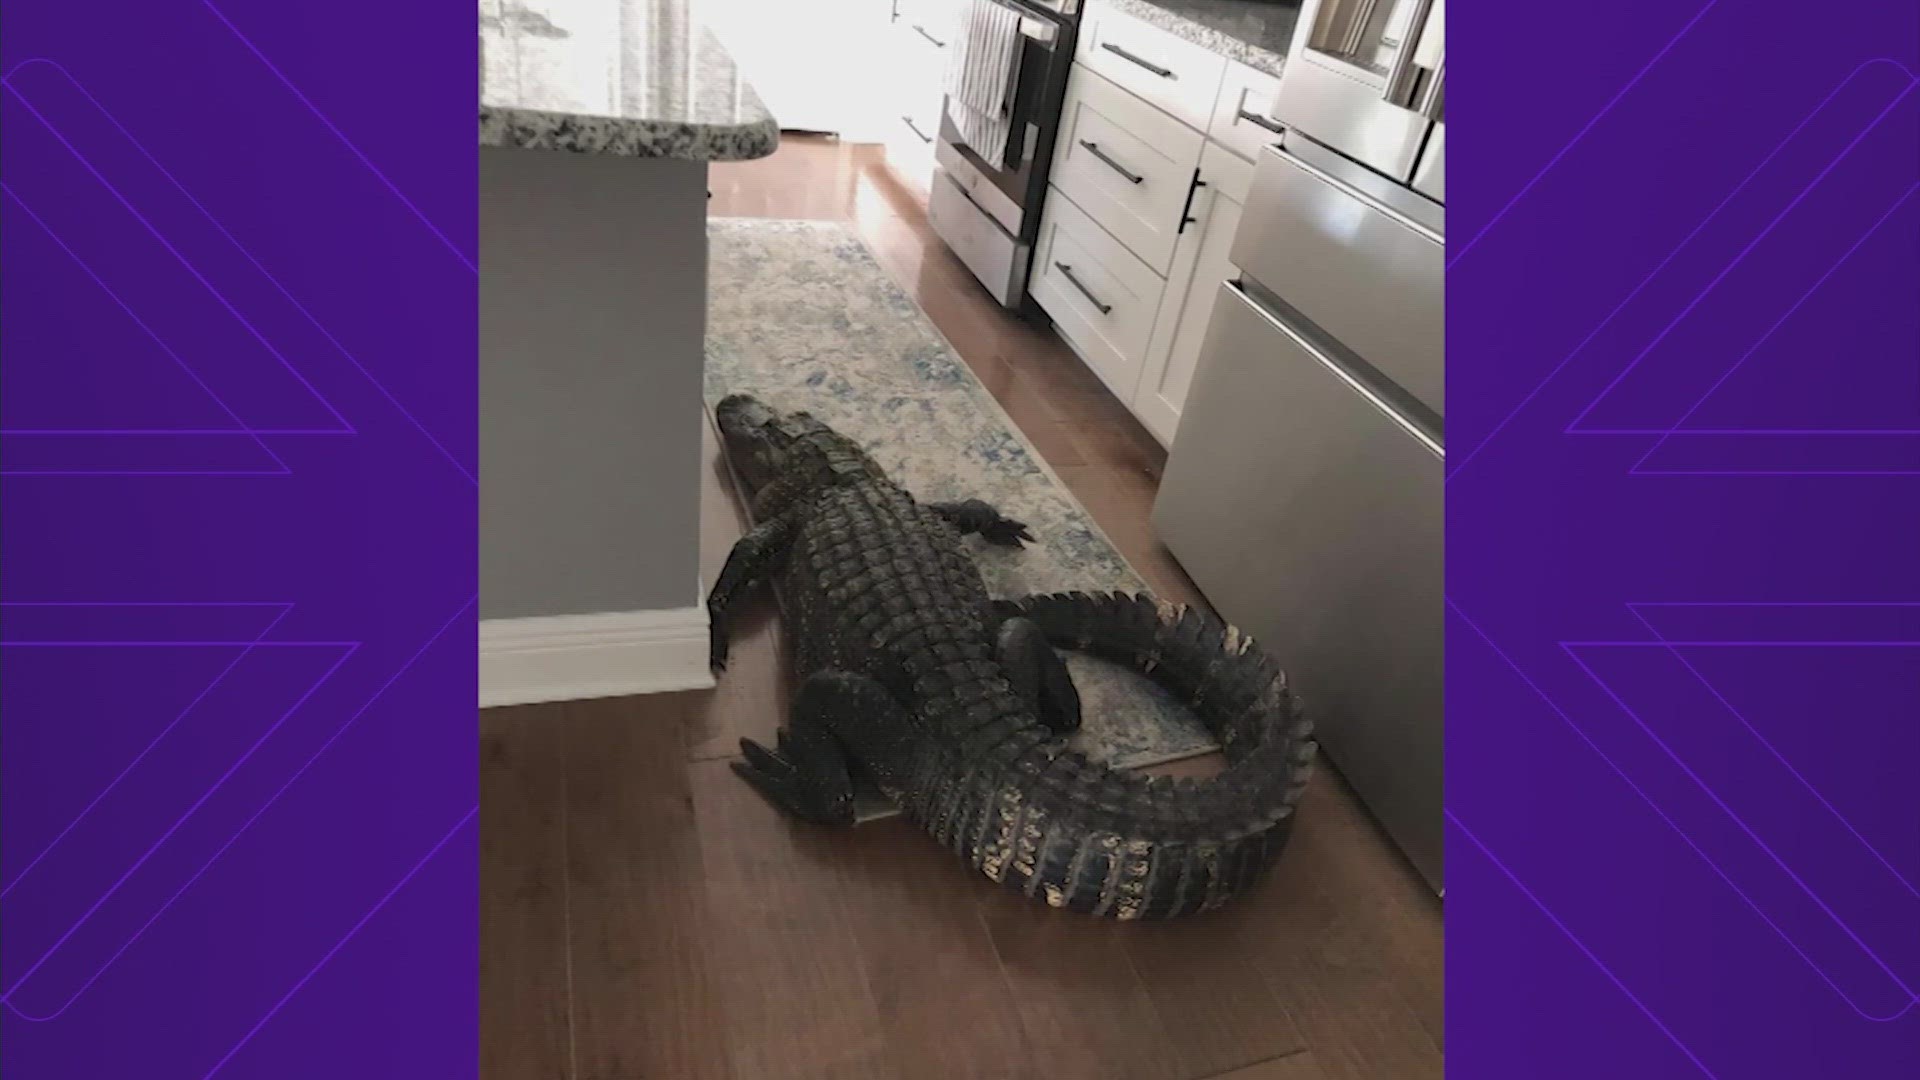 The alligator apparently was looking for a snack, as it went straight for the kitchen and wouldn't leave.